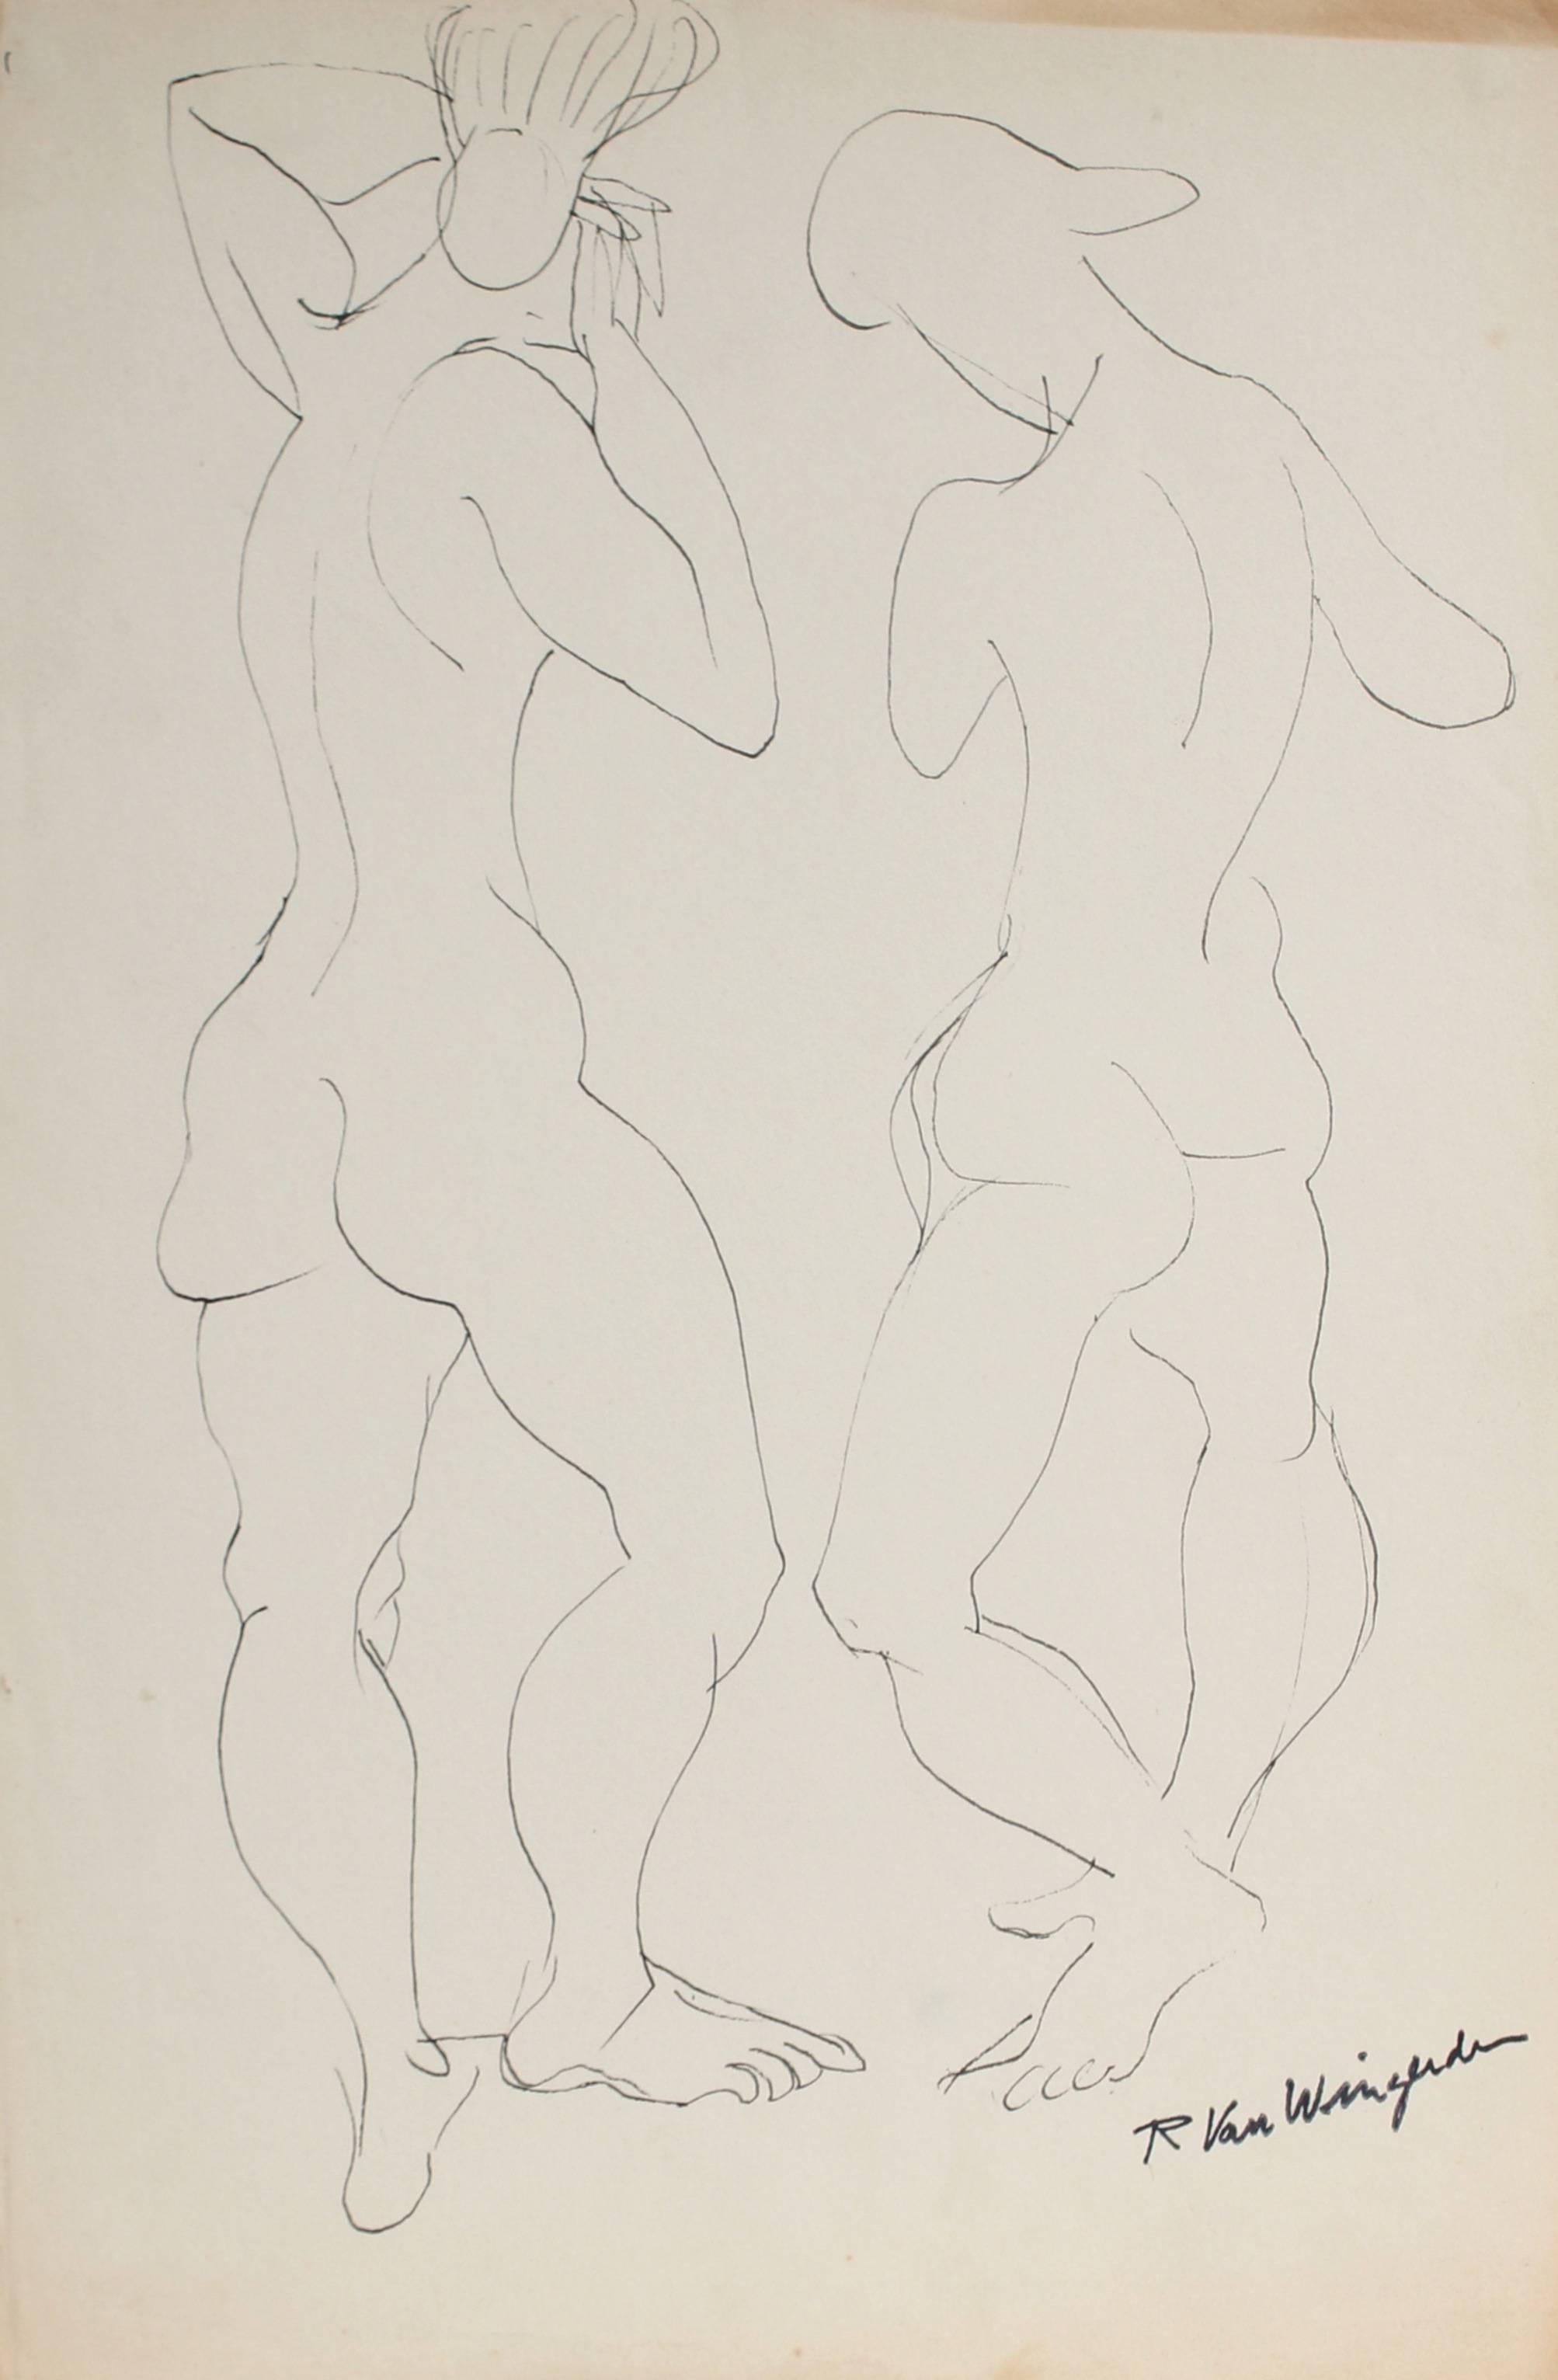 Two Expressionist Figures in Ink, Mid 20th Century